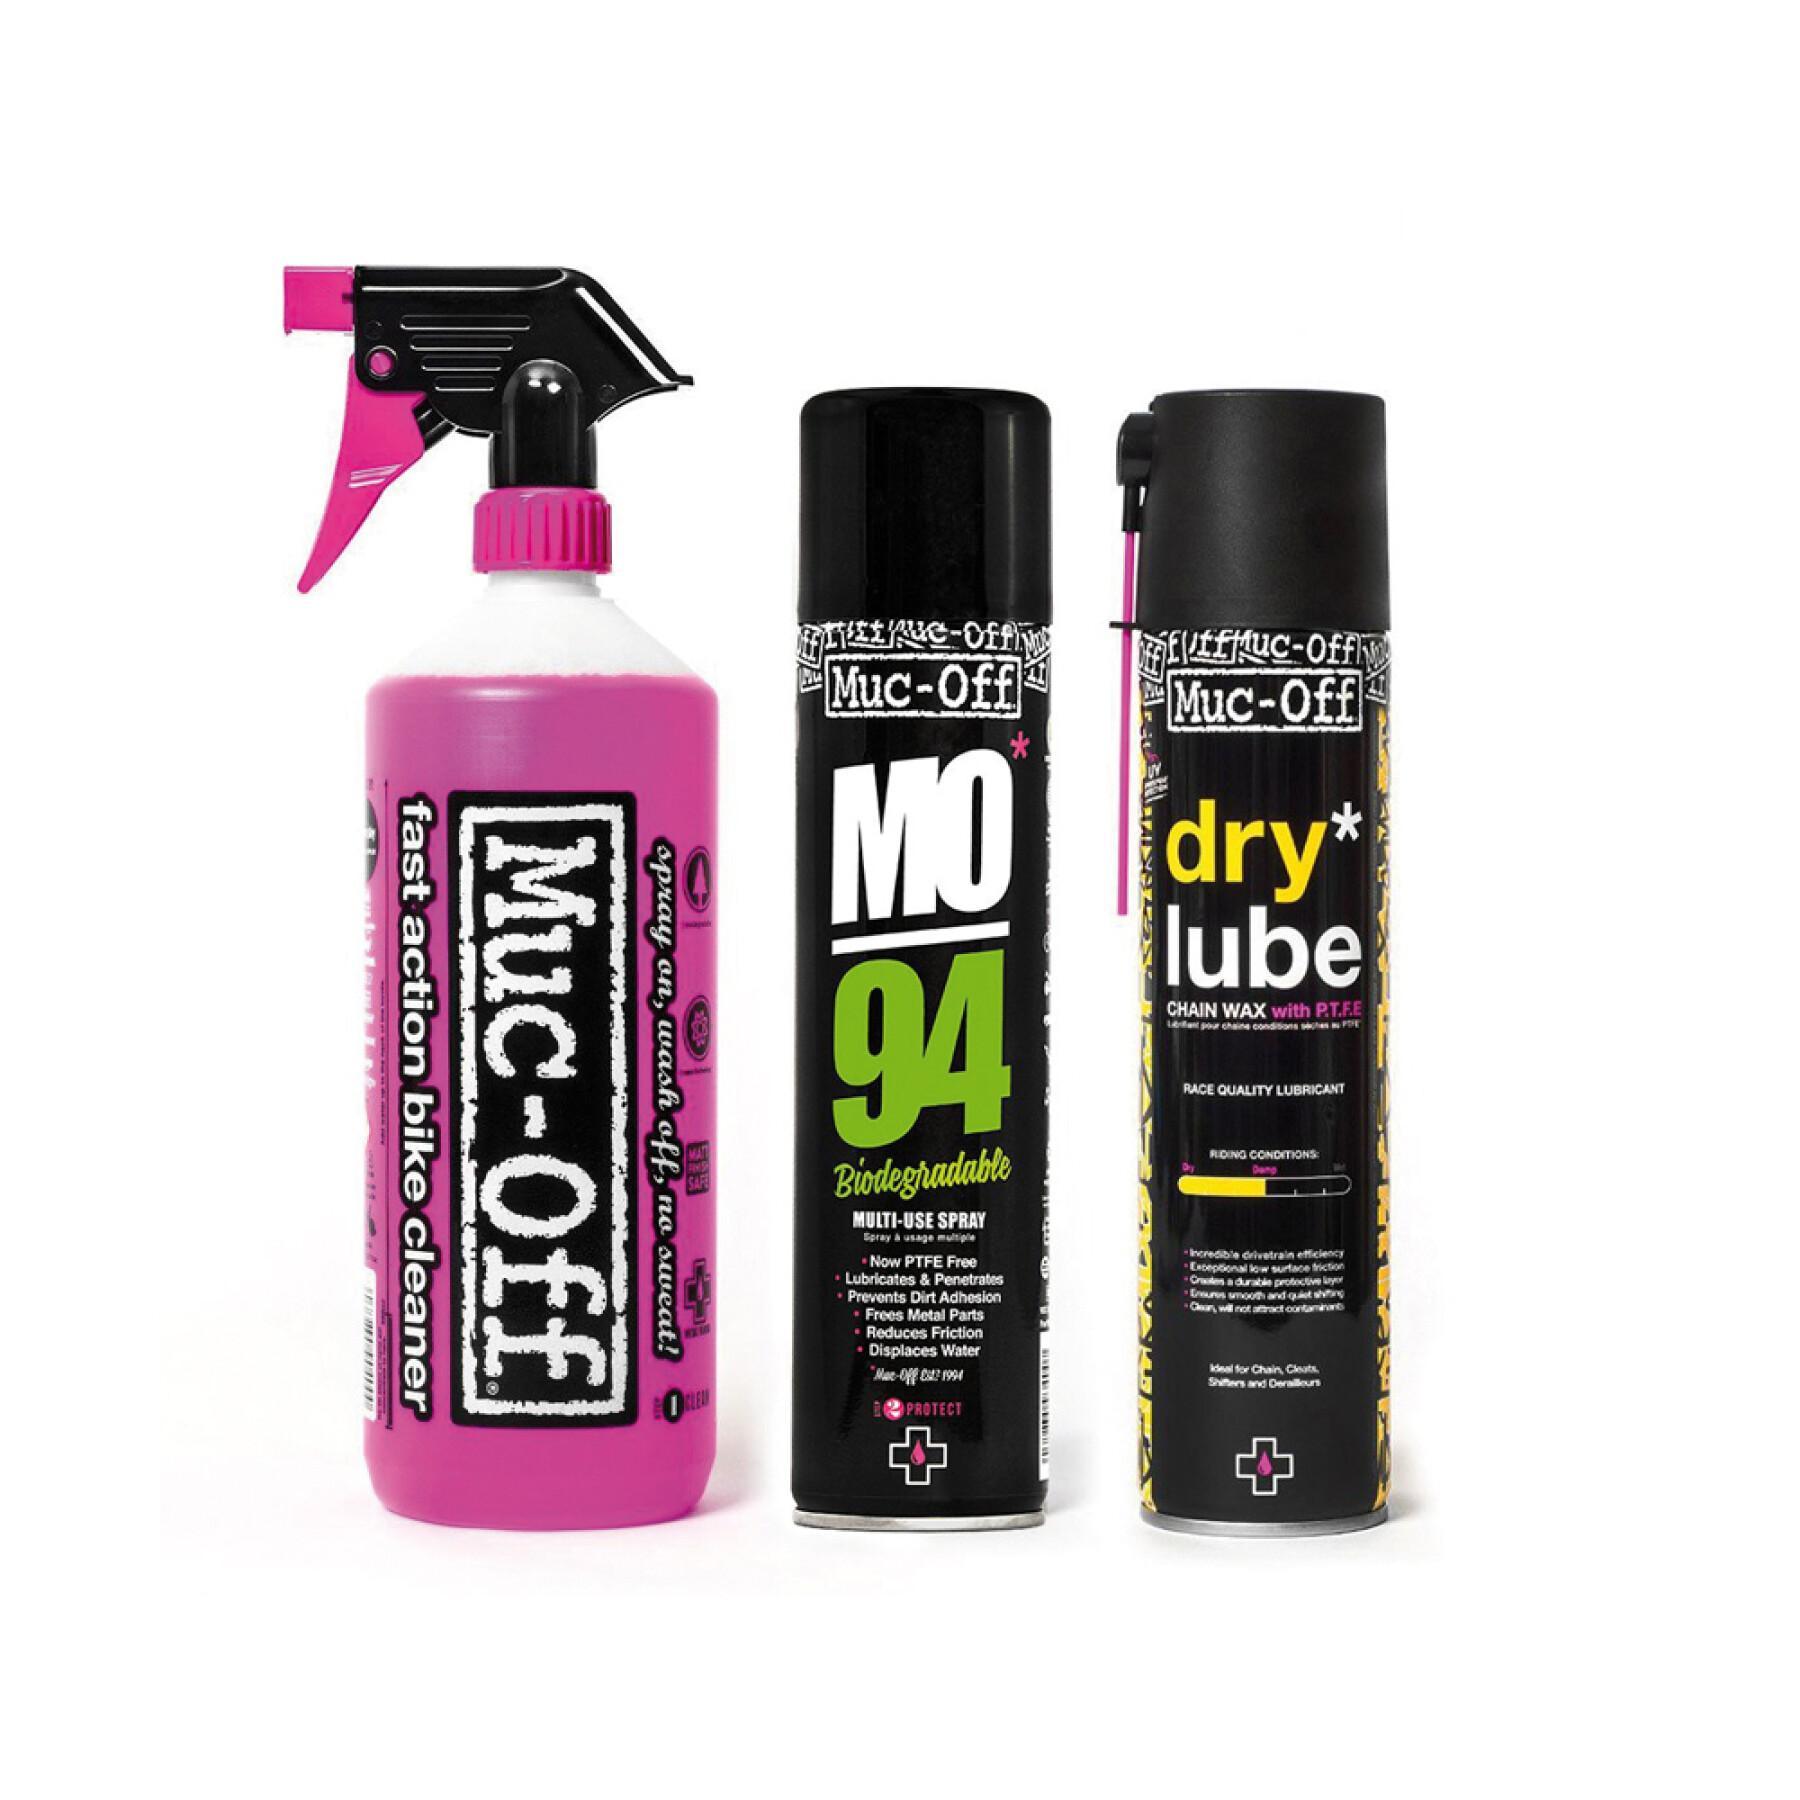 Mais limpo Muc-Off wash protect and lube kit dry